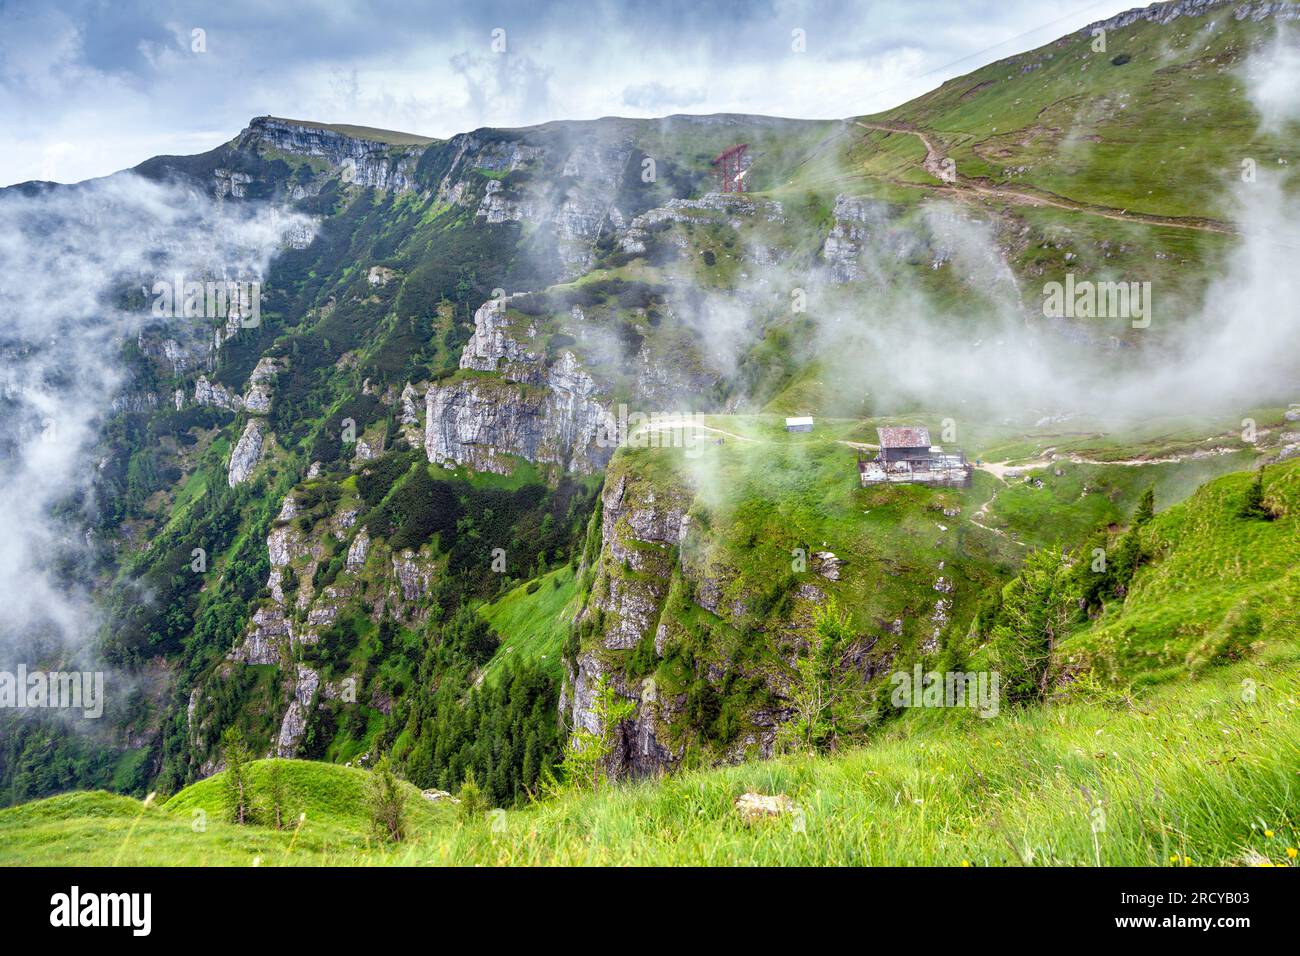 Cabin and mountains shrouded in clouds along the hiking path from Busteni to Caraiman Peak in the Carpathian Mountains, Romania. Stock Photo